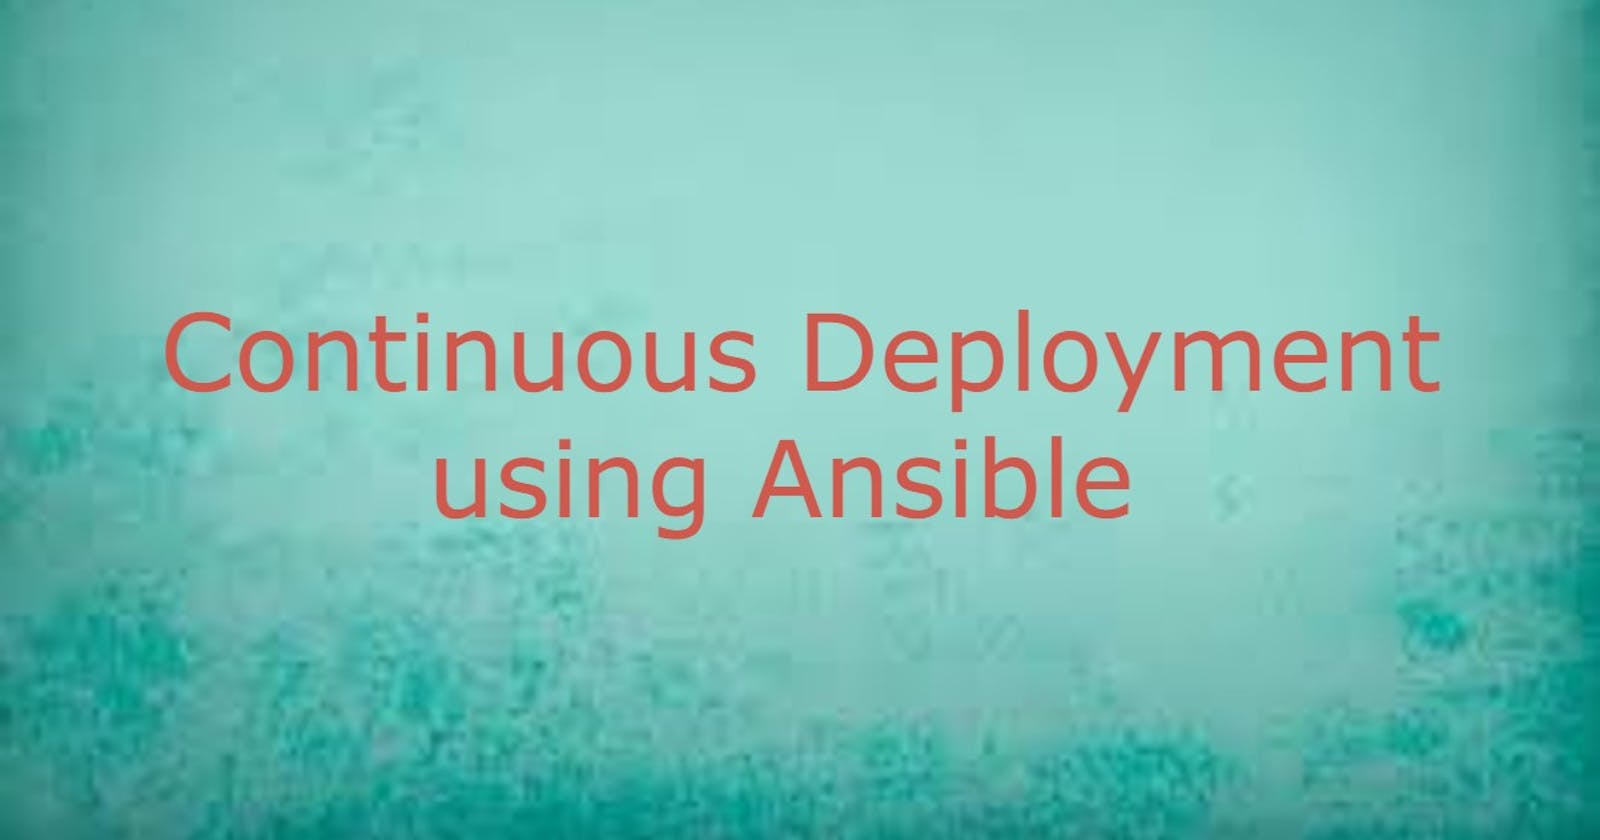 Continuous Deployment (CD) using Ansible